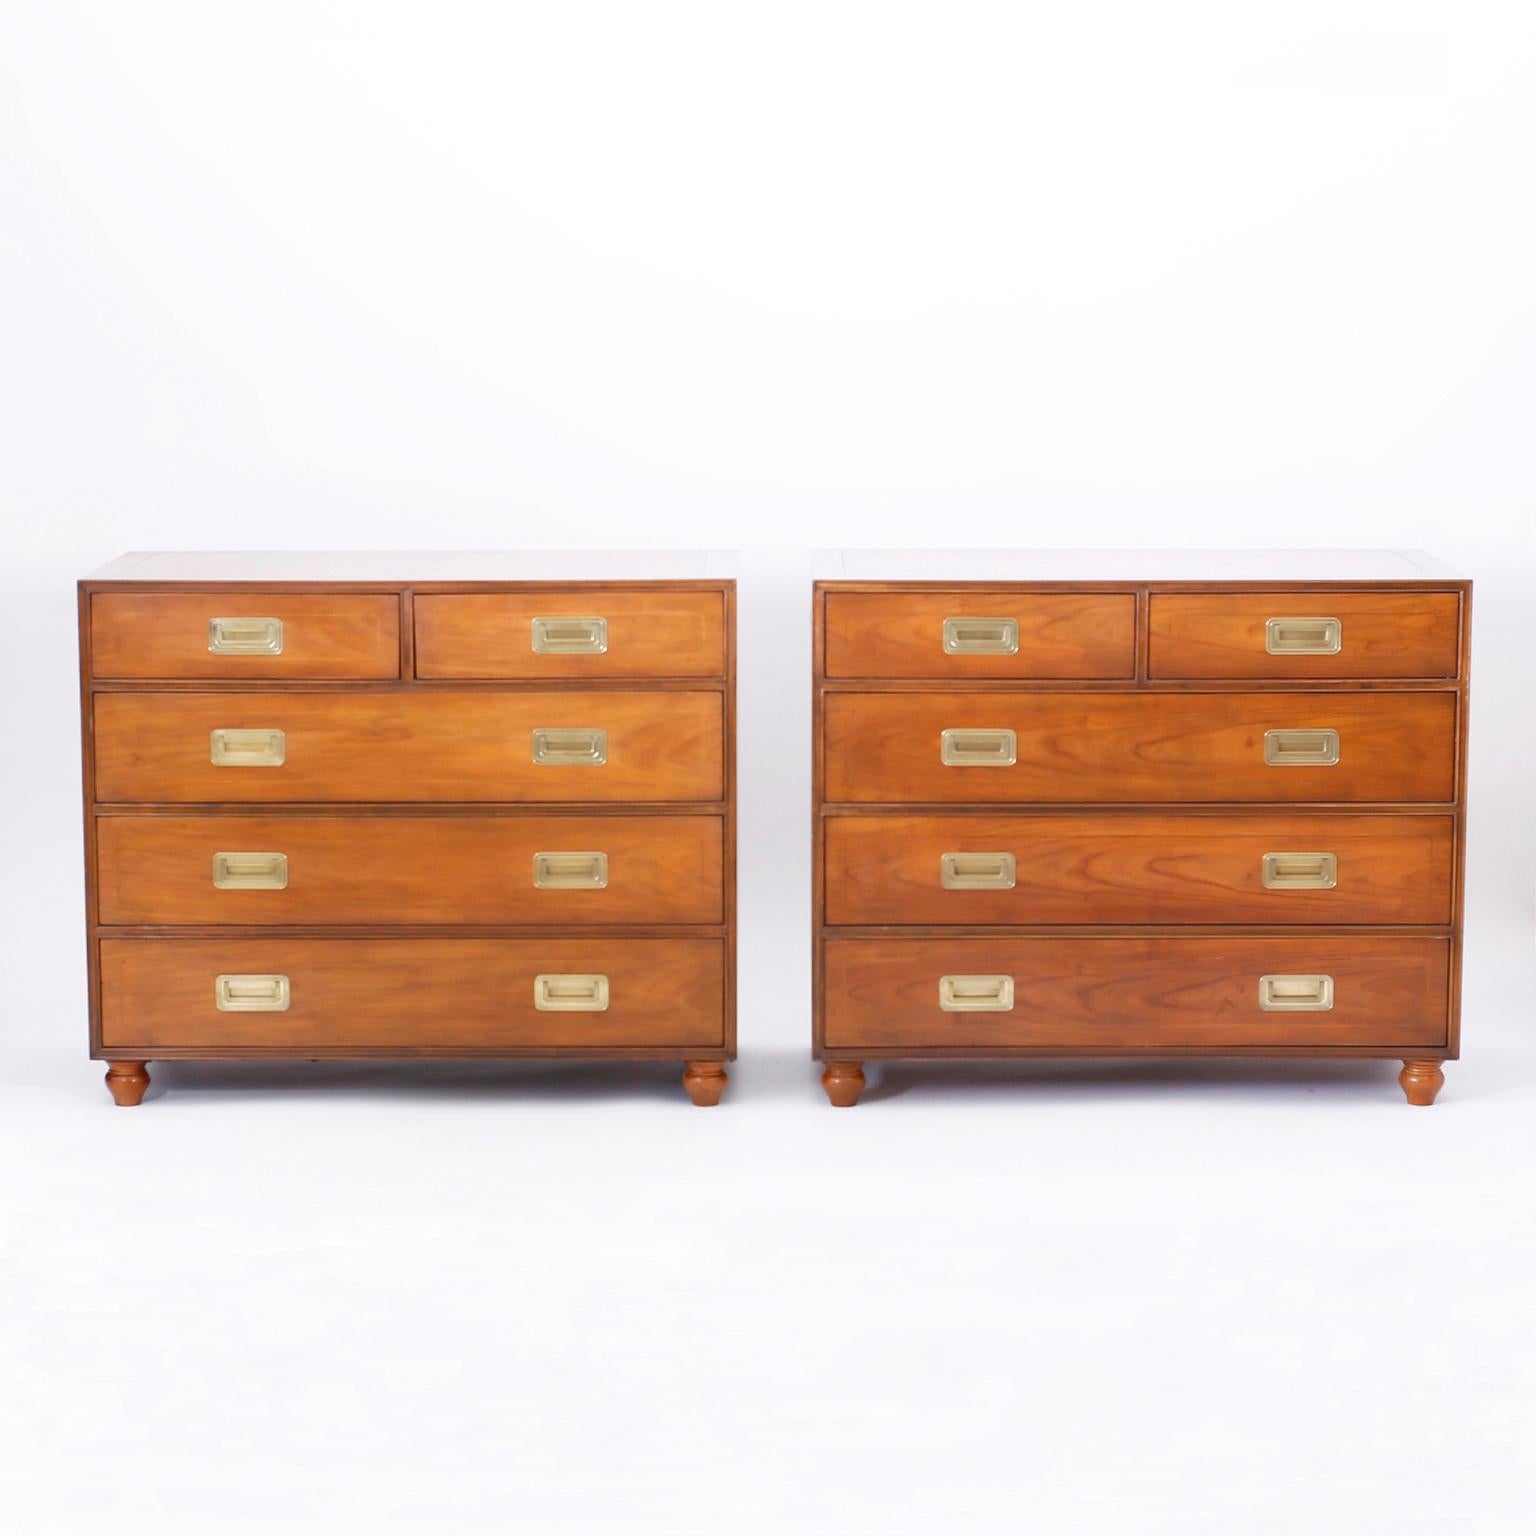 Pair of Campaign style chests crafted in well grained walnut with a sleek no nonsense form, brass hardware and turned feet. Perfect combination of Classic and modern and signed Baker Furniture in a drawer.